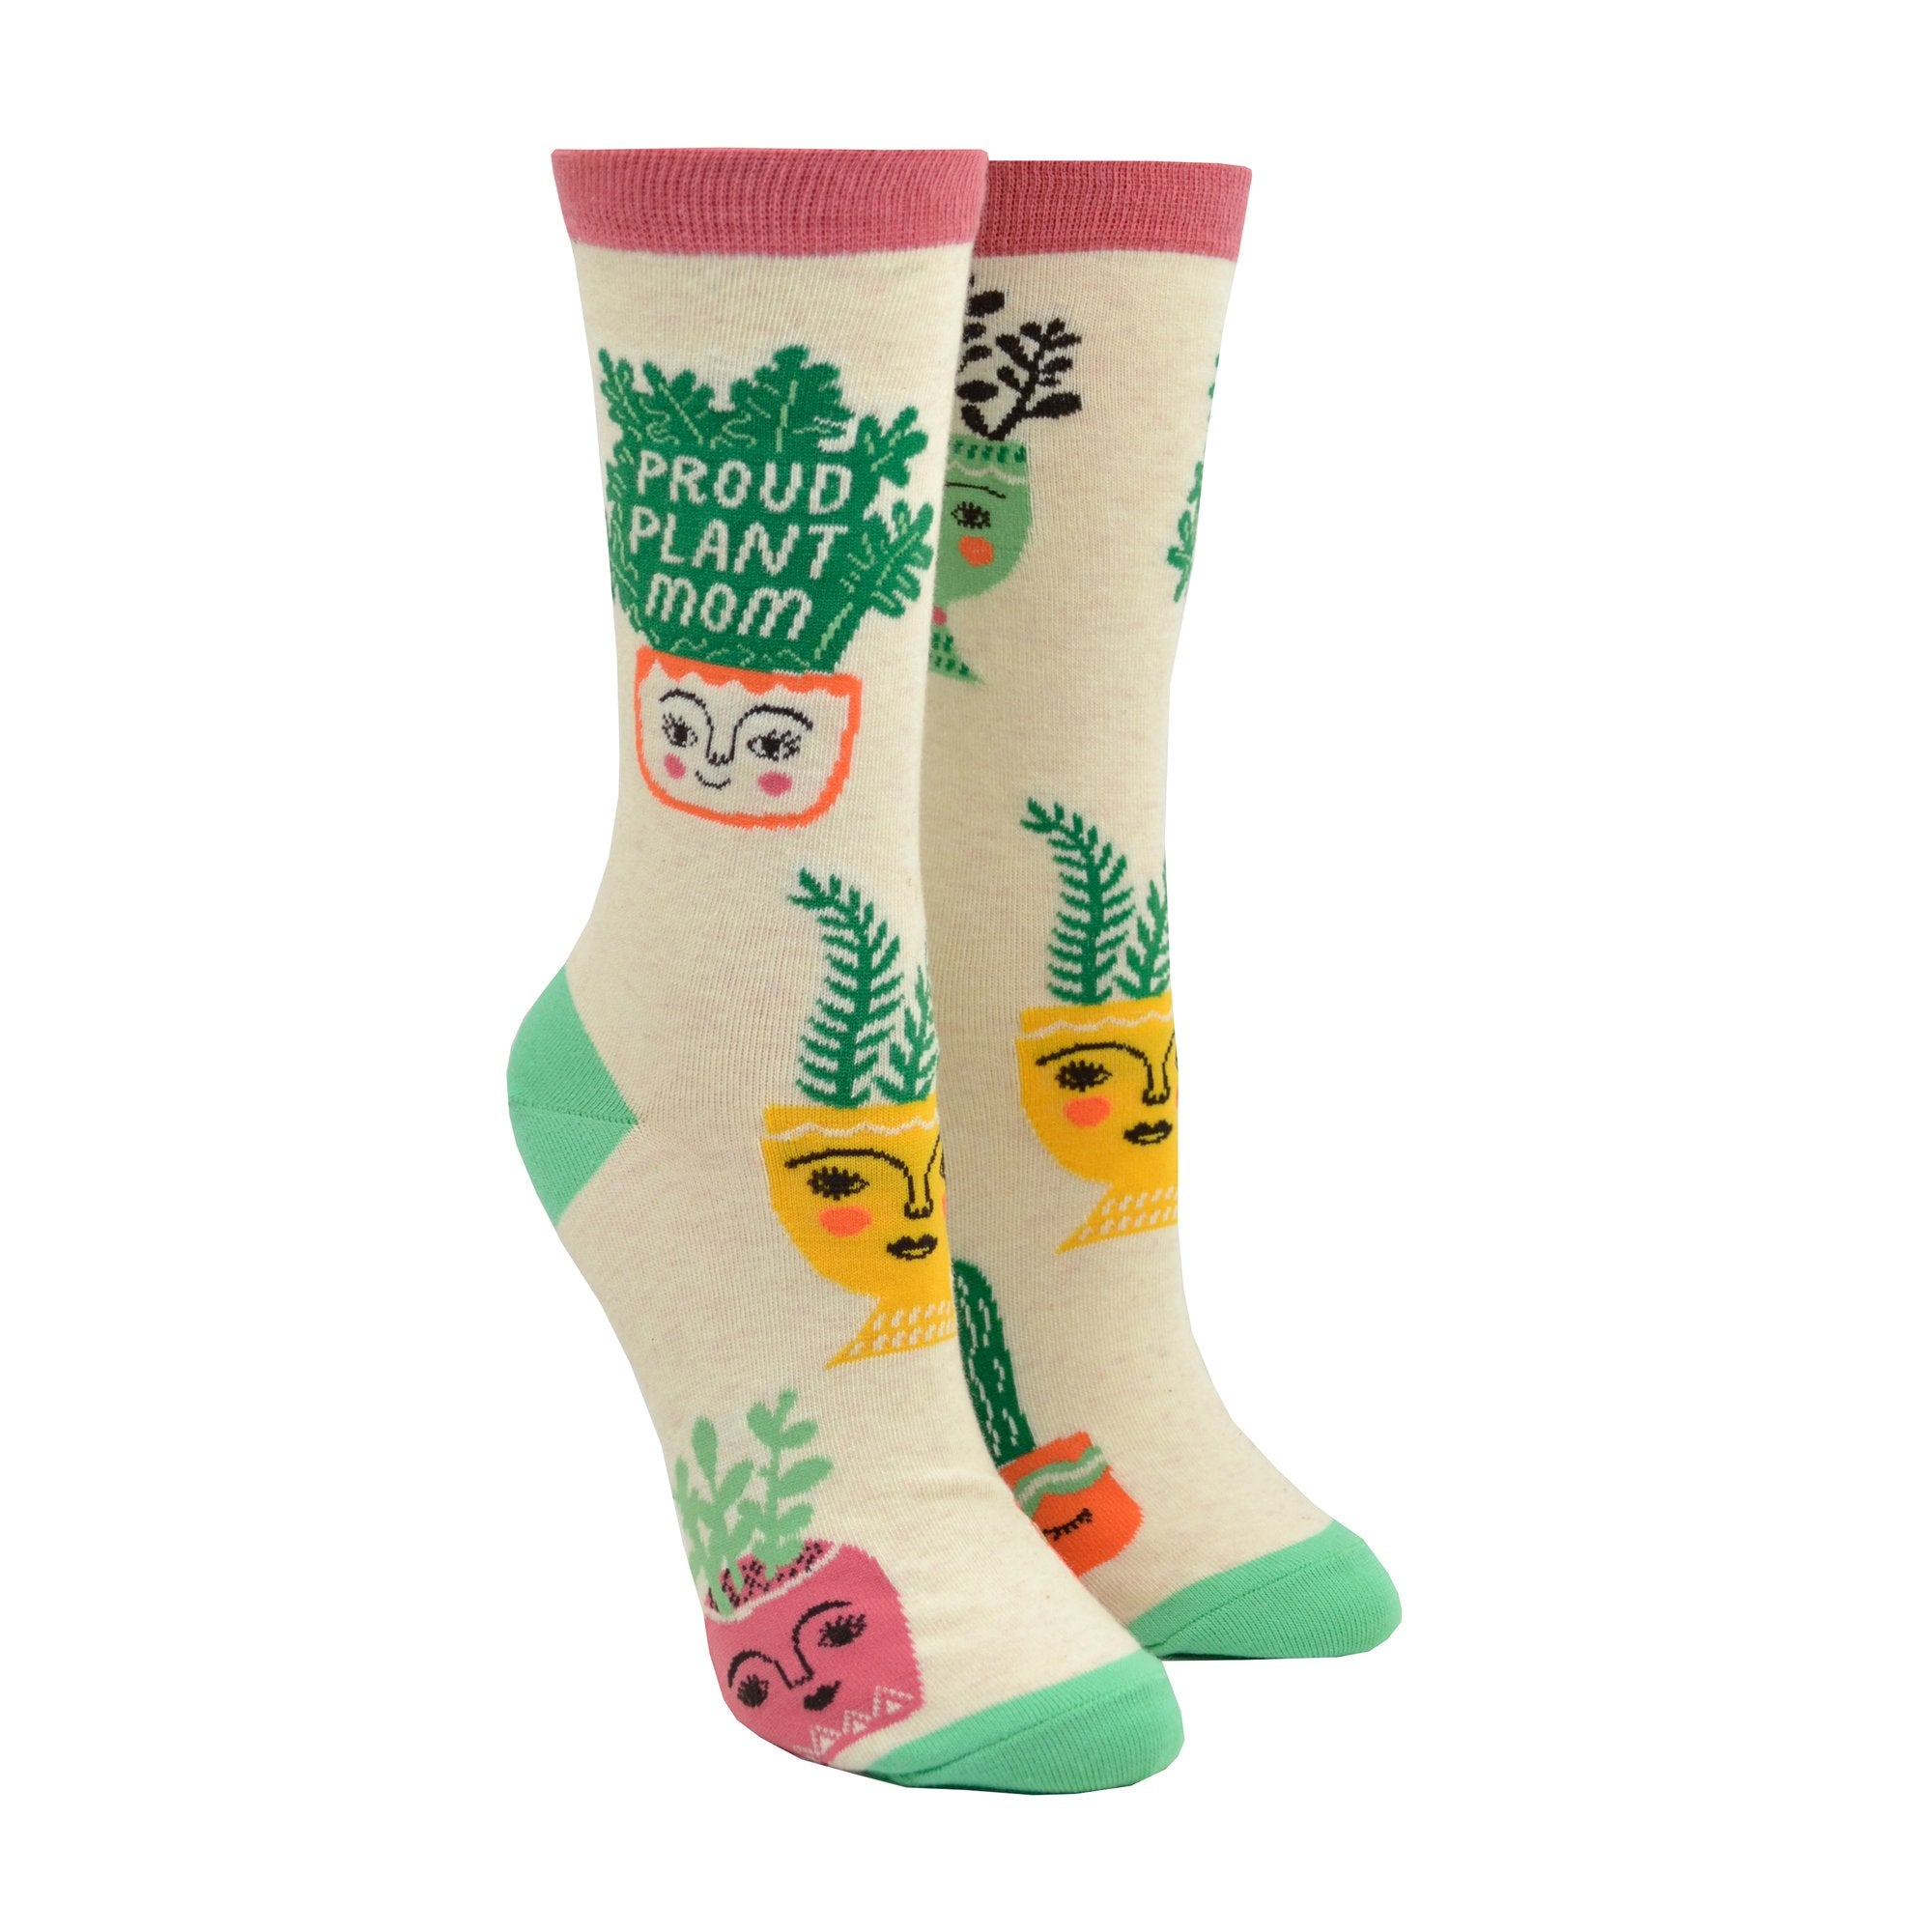 cream socks with potted plants with faces, one plant says proud plant mom